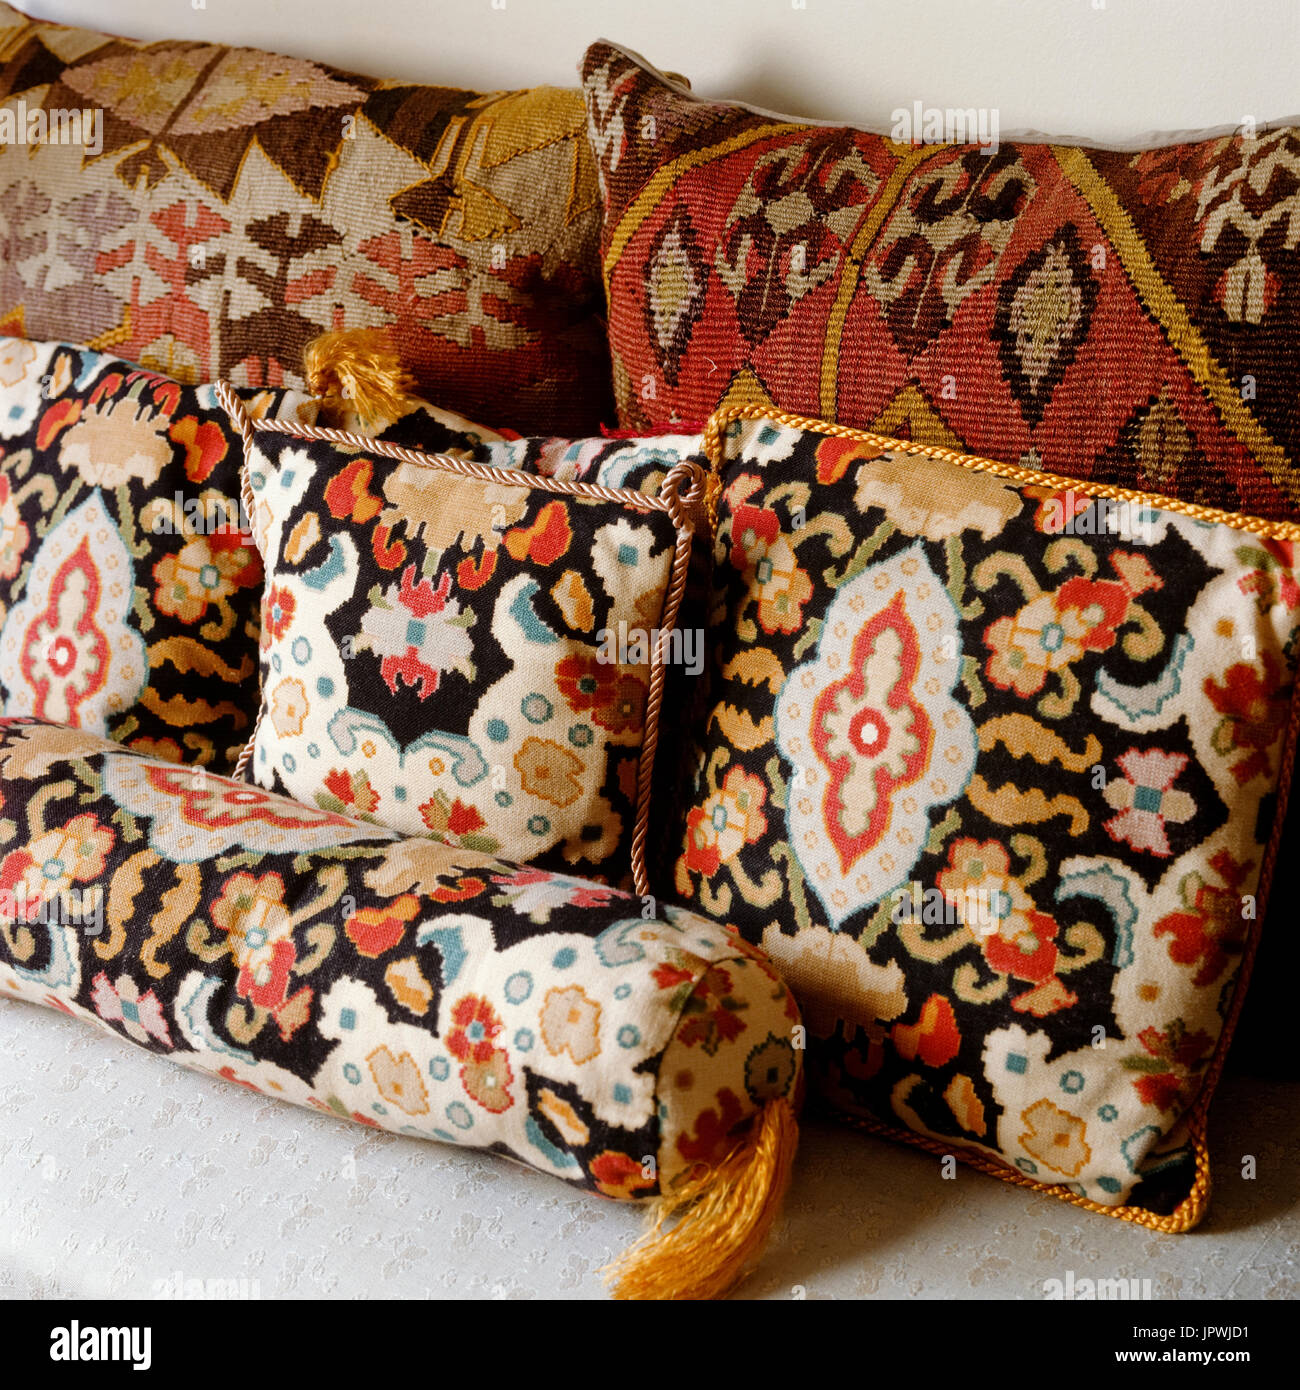 Patterned cushions Stock Photo